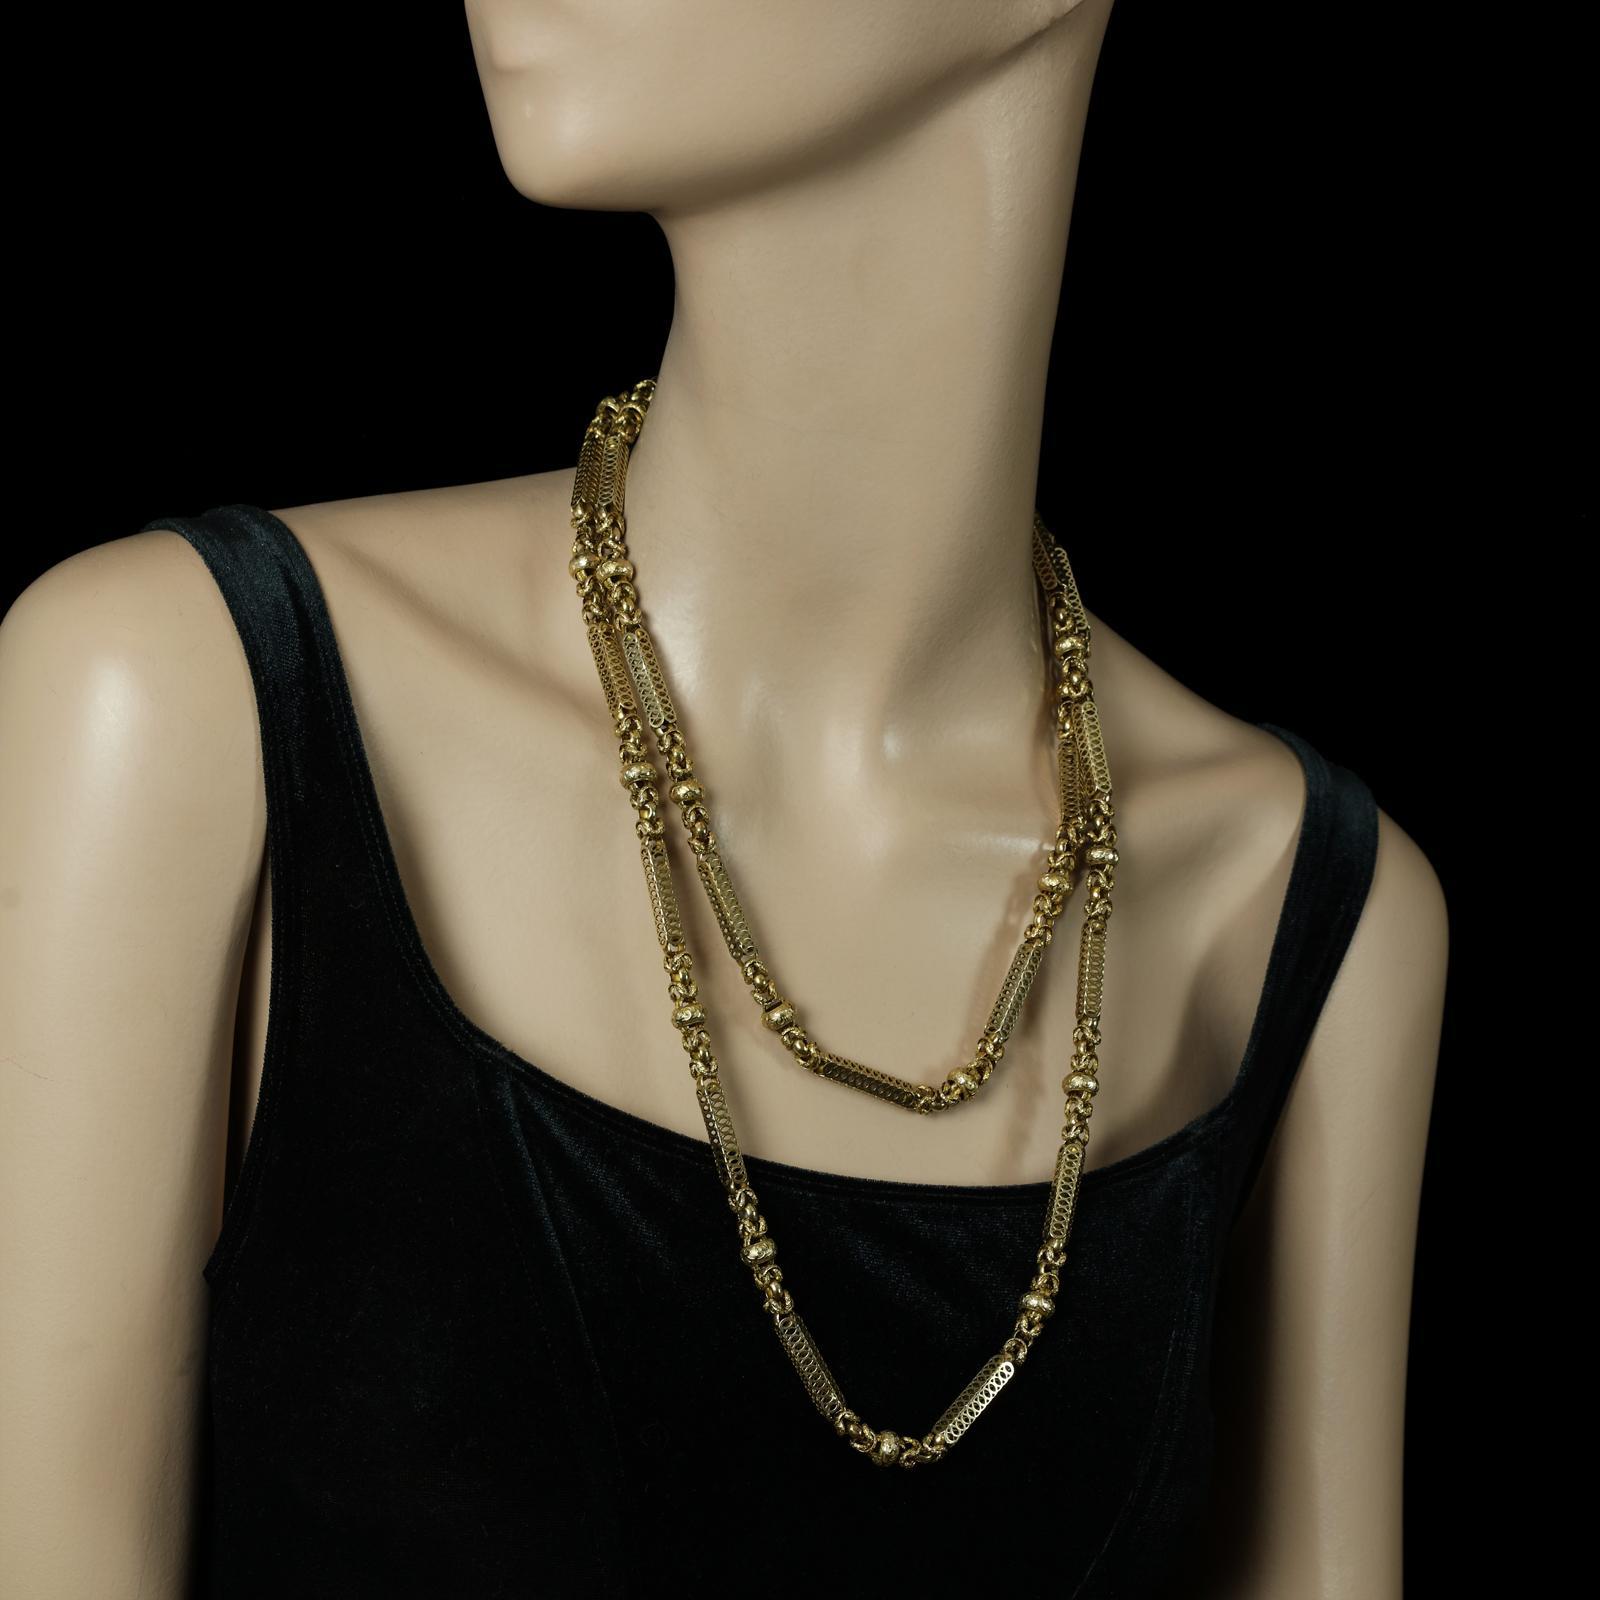 A wonderful Georgian 18ct gold long chain c.1830, composed of twenty elongated openwork cage links with five uniform sides formed of overlapping circle motifs, joined by sections of chain link with both hammered and plain polished links and a single